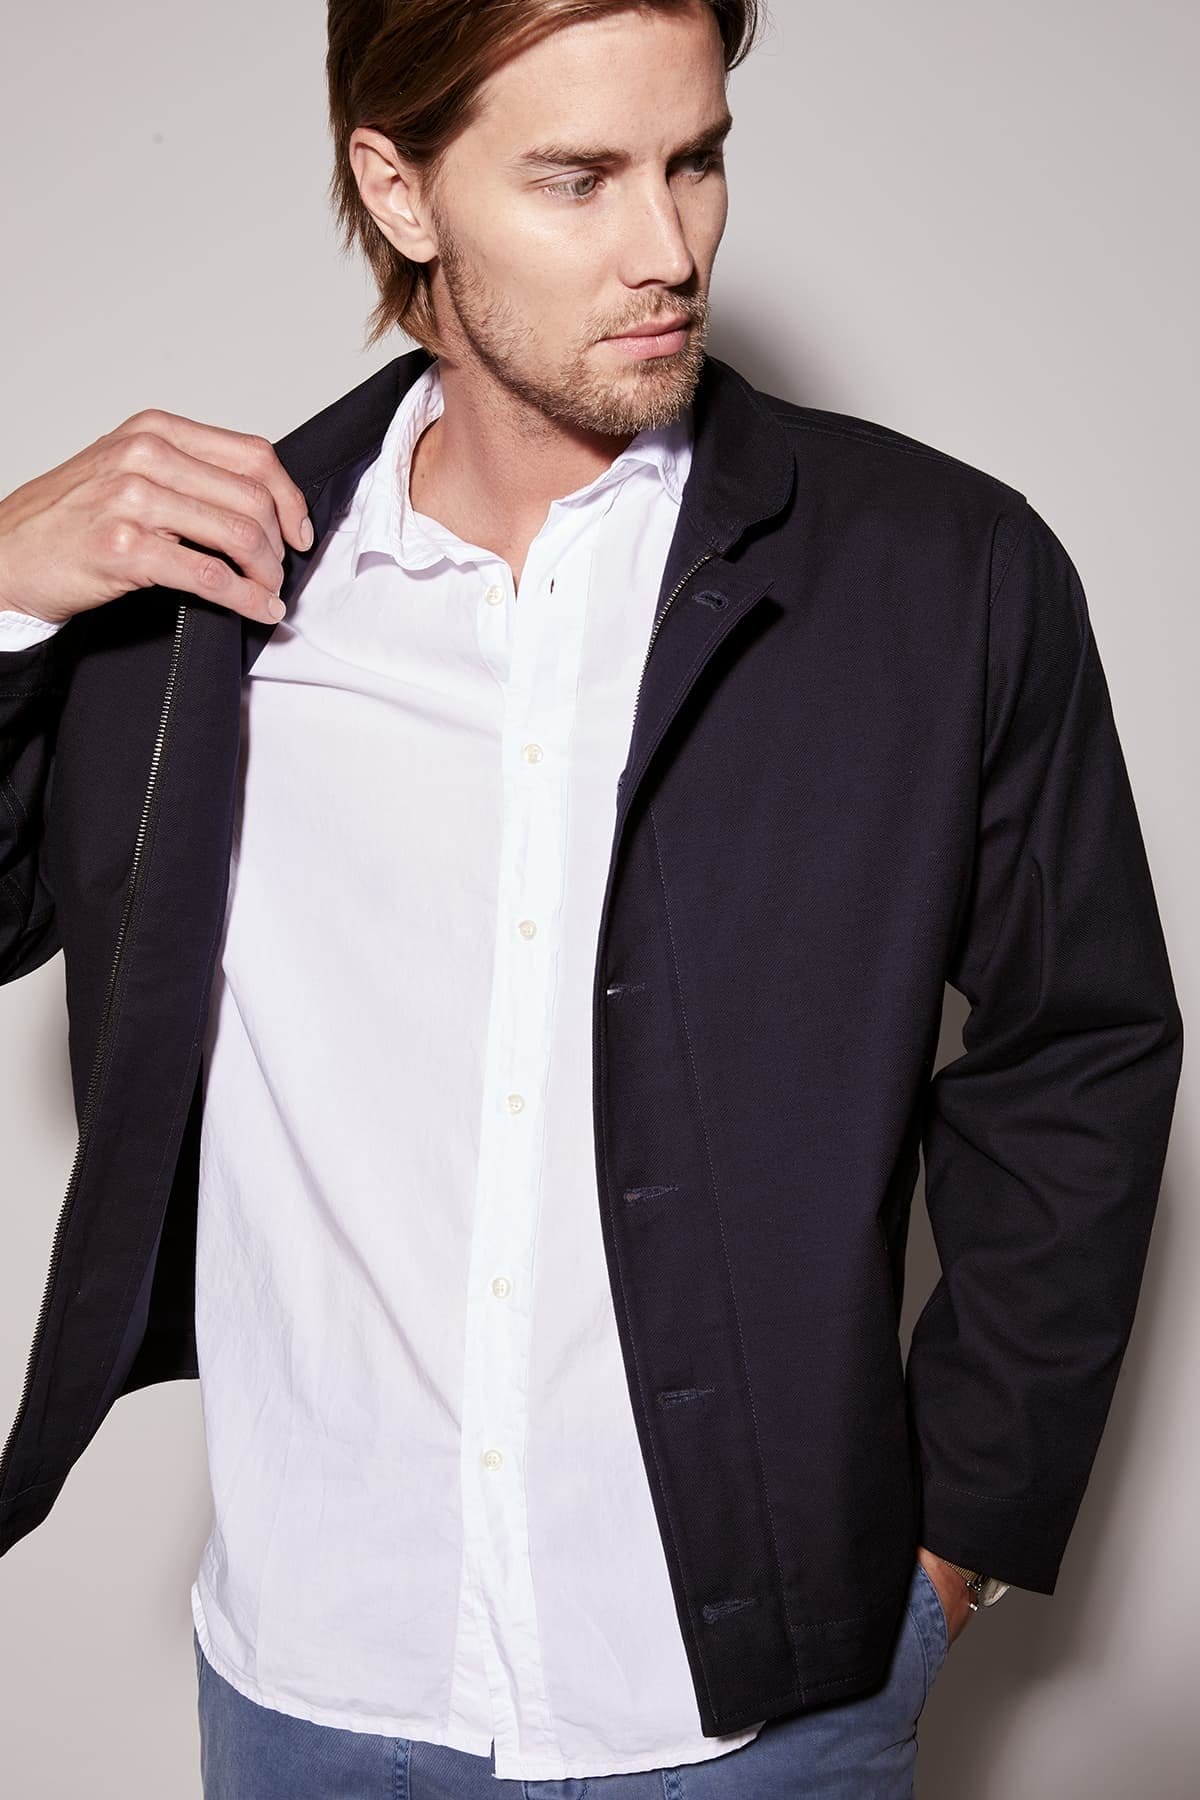 Model wearing the Brooks Button-Up Shirt and Marlon Jacket